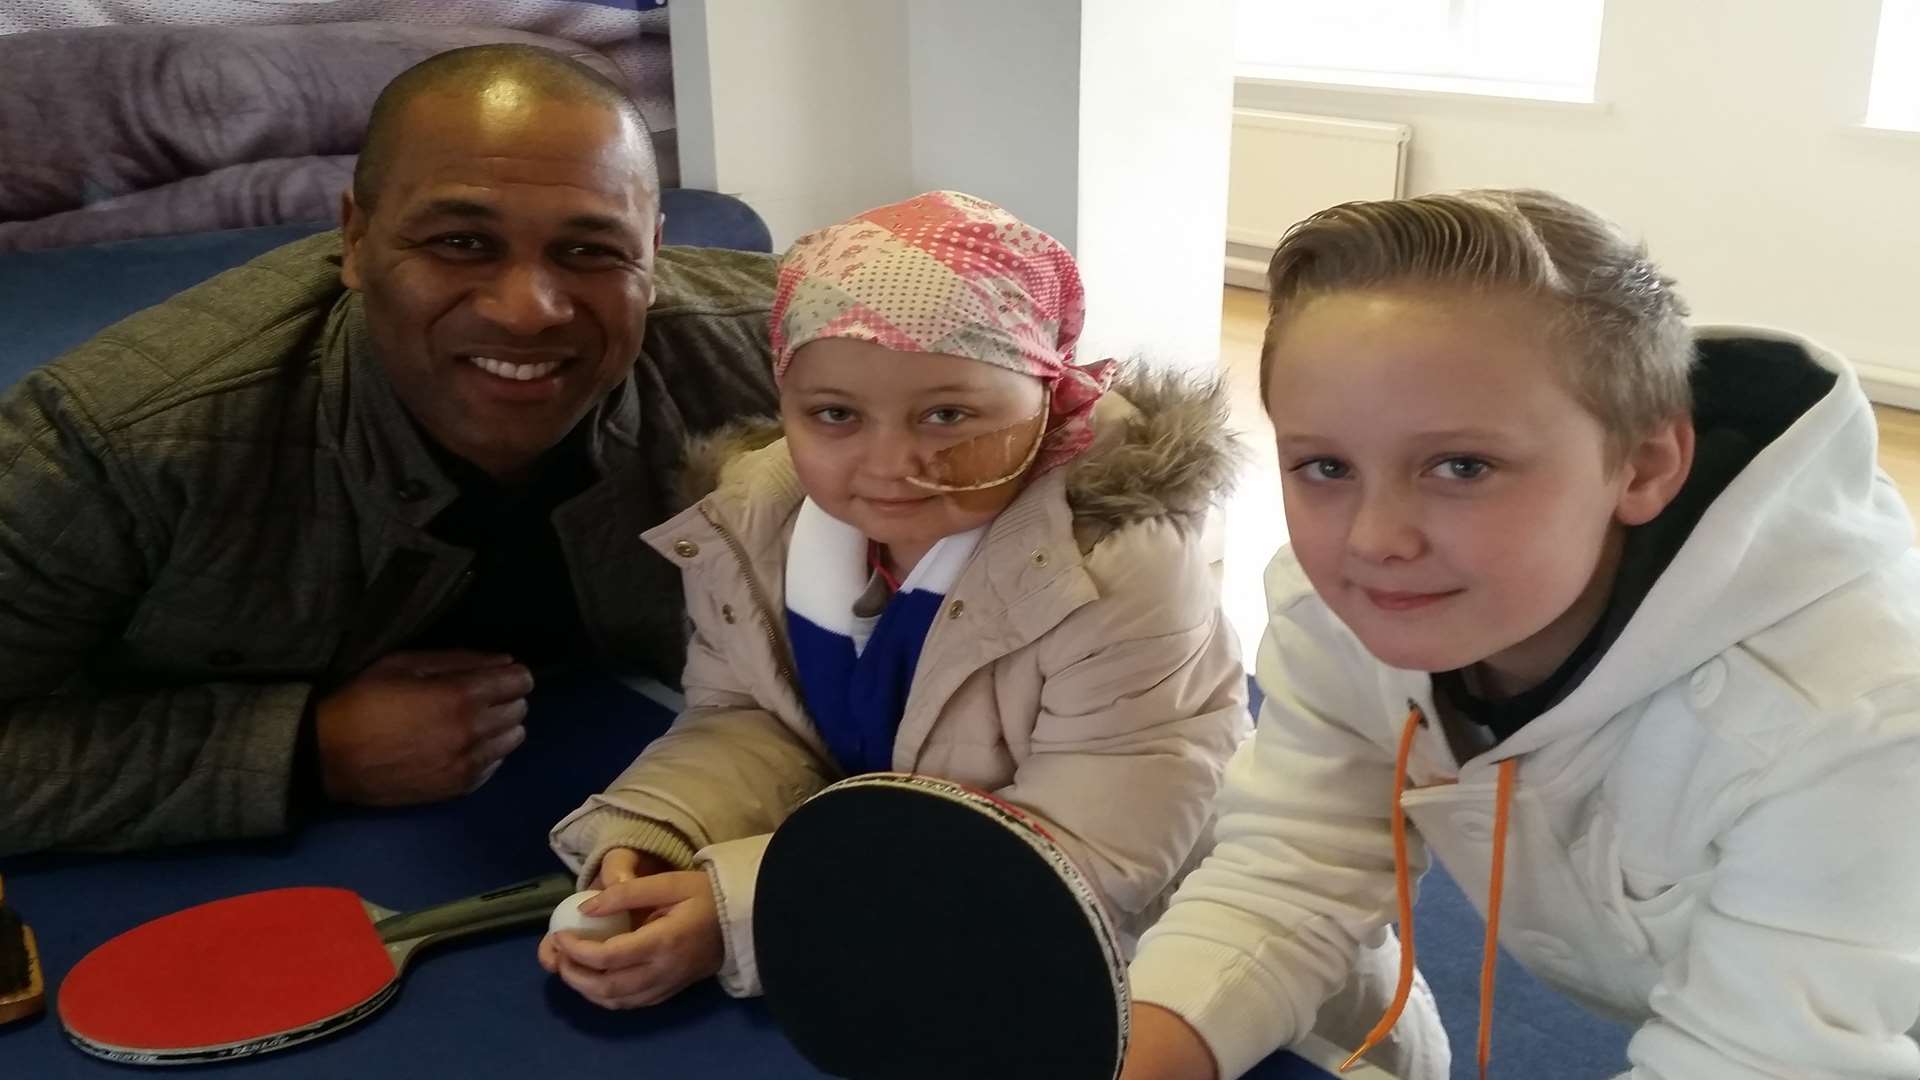 Stacey and her brother Jake met QPR coach and former England striker Les Ferdinand